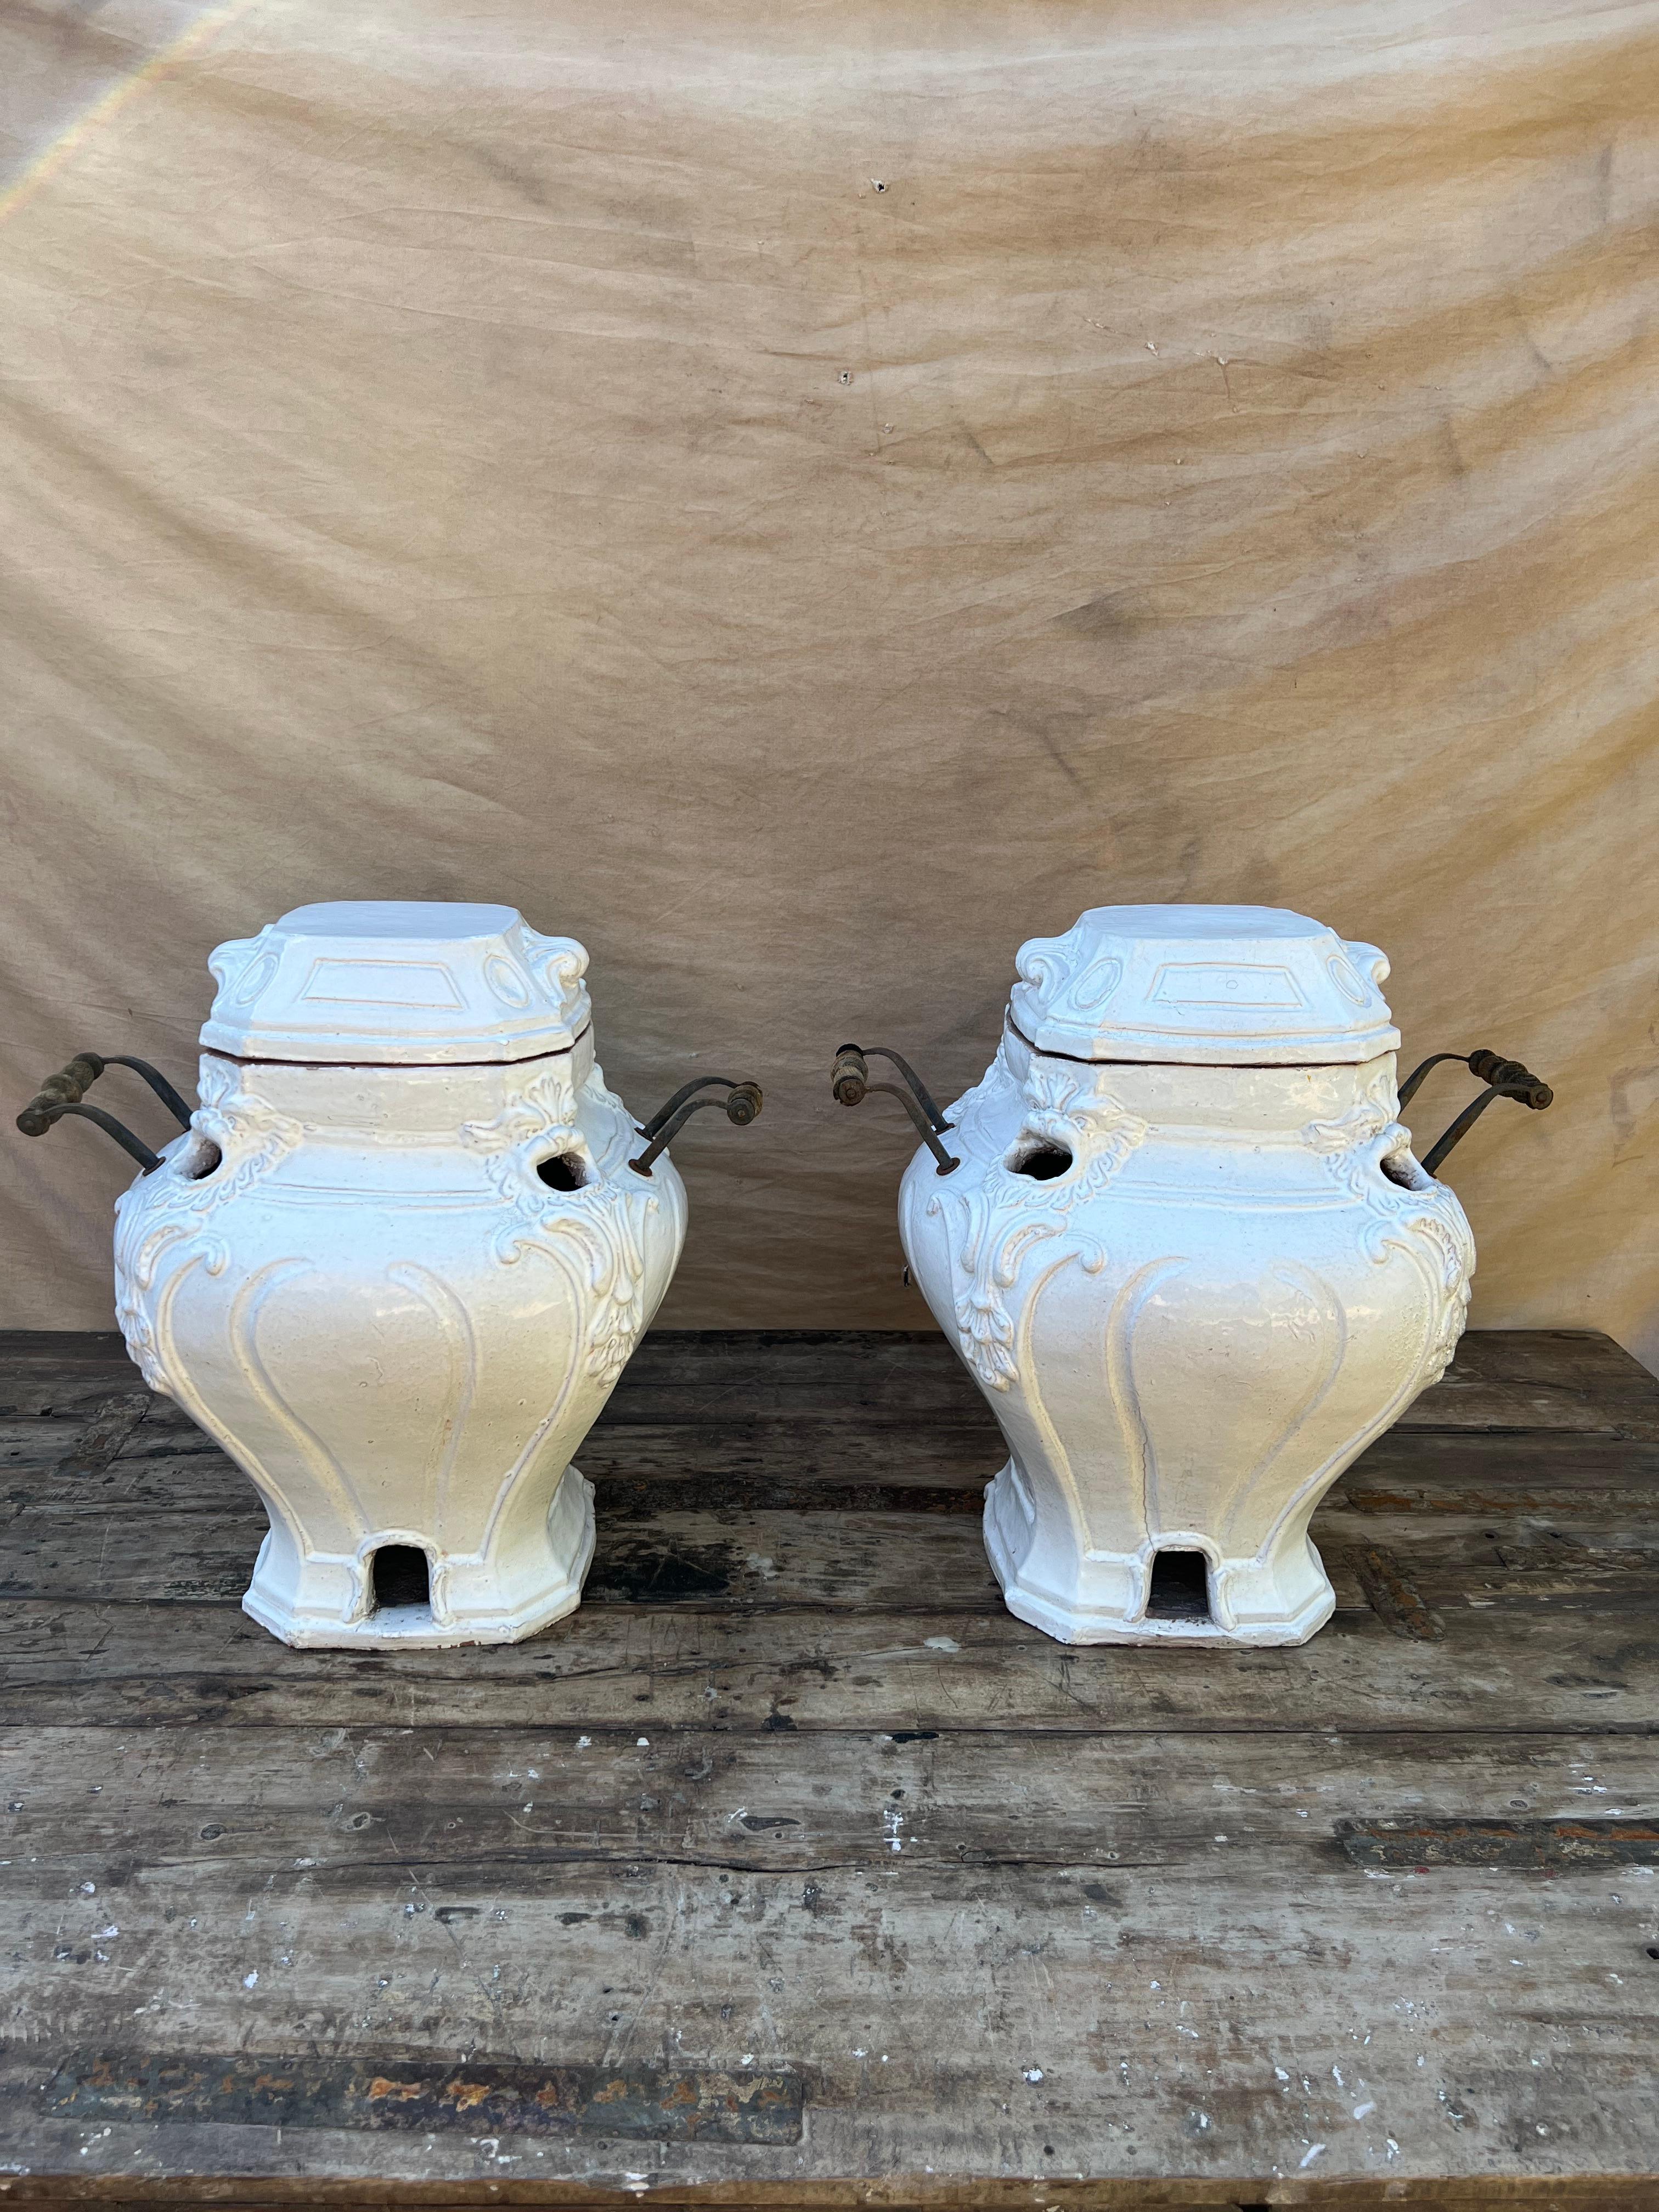 Pair of Glazed Terracotta Garden Urns or Jardinieres with Metal and Wood Handles For Sale 9